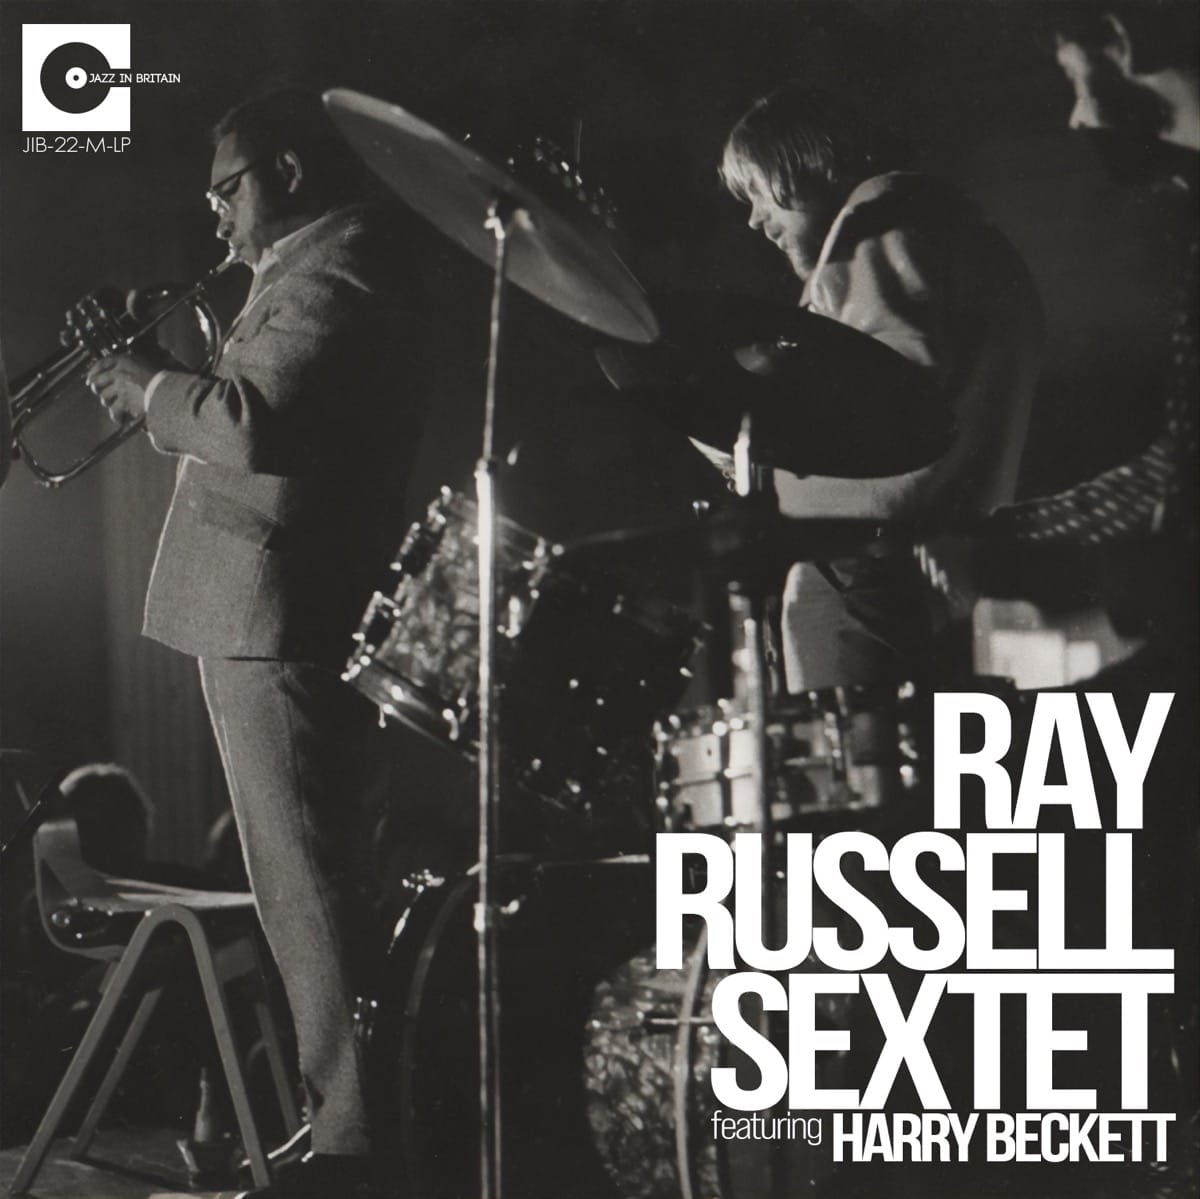 The Ray Russell Sextet featuring Harry Beckett - Forget To Remember Live Vol. 2: 1970 LP Limited Edition Import of 500